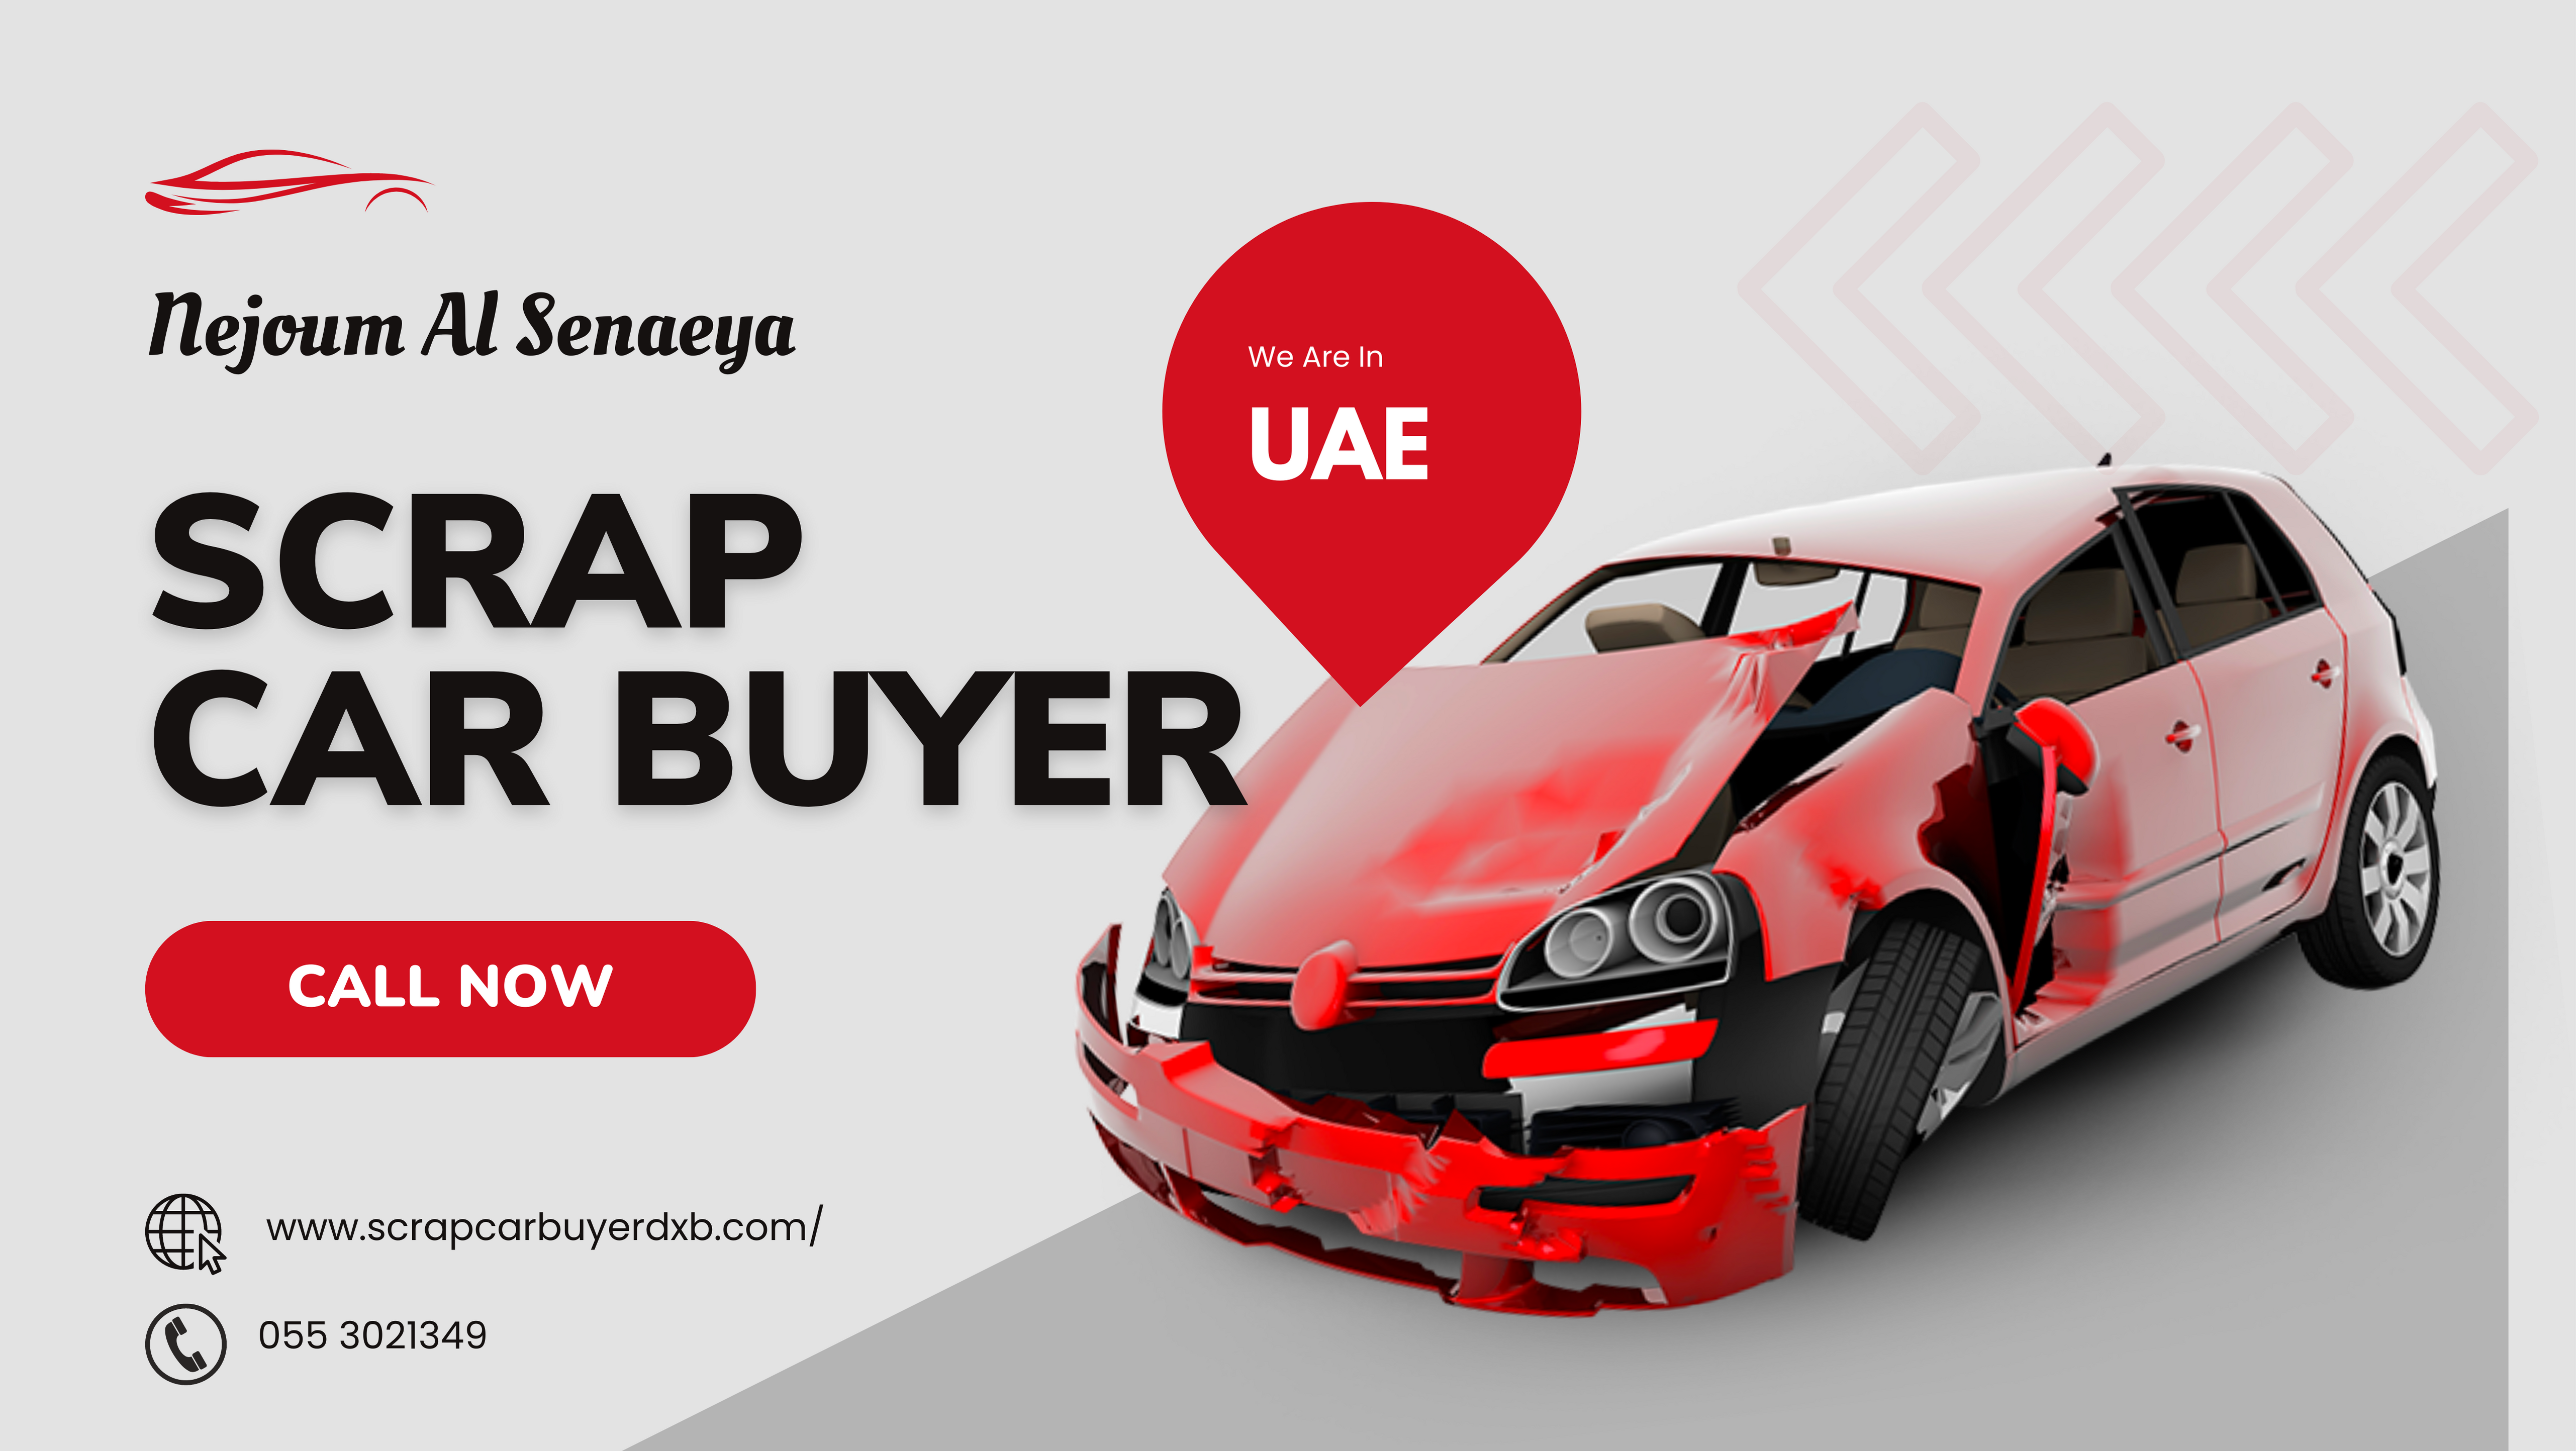 scrap car buyers,scrap car buyer,scrap car buying,scrap car buyers dubai,scrap car,scrap car buyer in dubai,scrap car buyers in sharjah,scrap car buyers in dubai We Buy All Type Of Scrap, Damaged, Used Or Old Car In Best Price. We Are Best Scrap Car Buyer In Dubai, Sharjah, And All Over The United Arab Emirates. Call Us Now And Get The Best Value For Your Car.